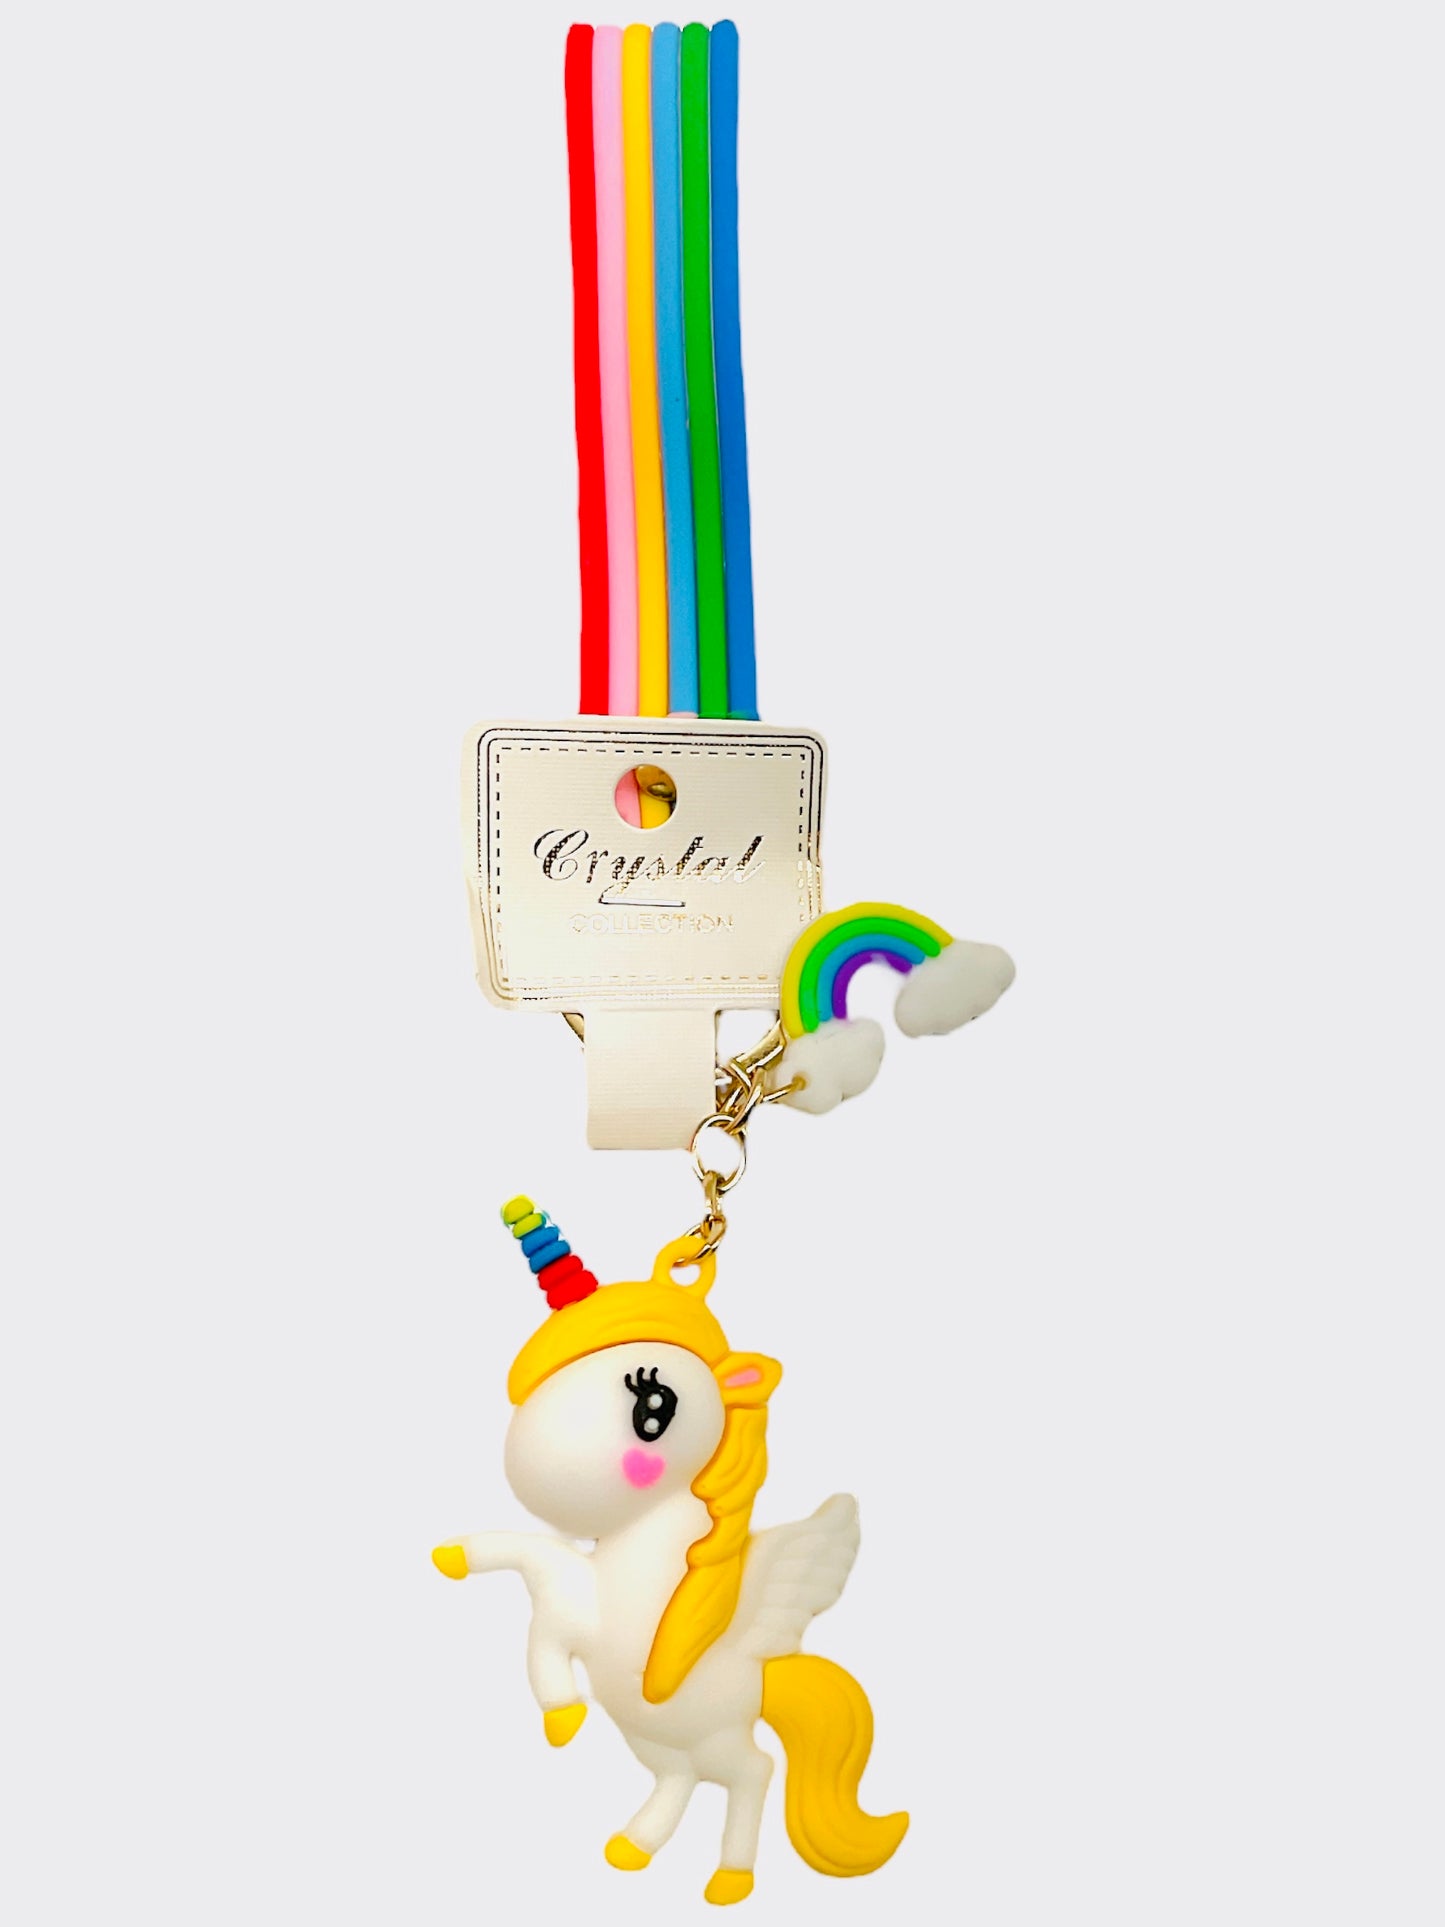 Crystal Collections Unicorn Keychain (1 Piece)(Color Chosen at Random)